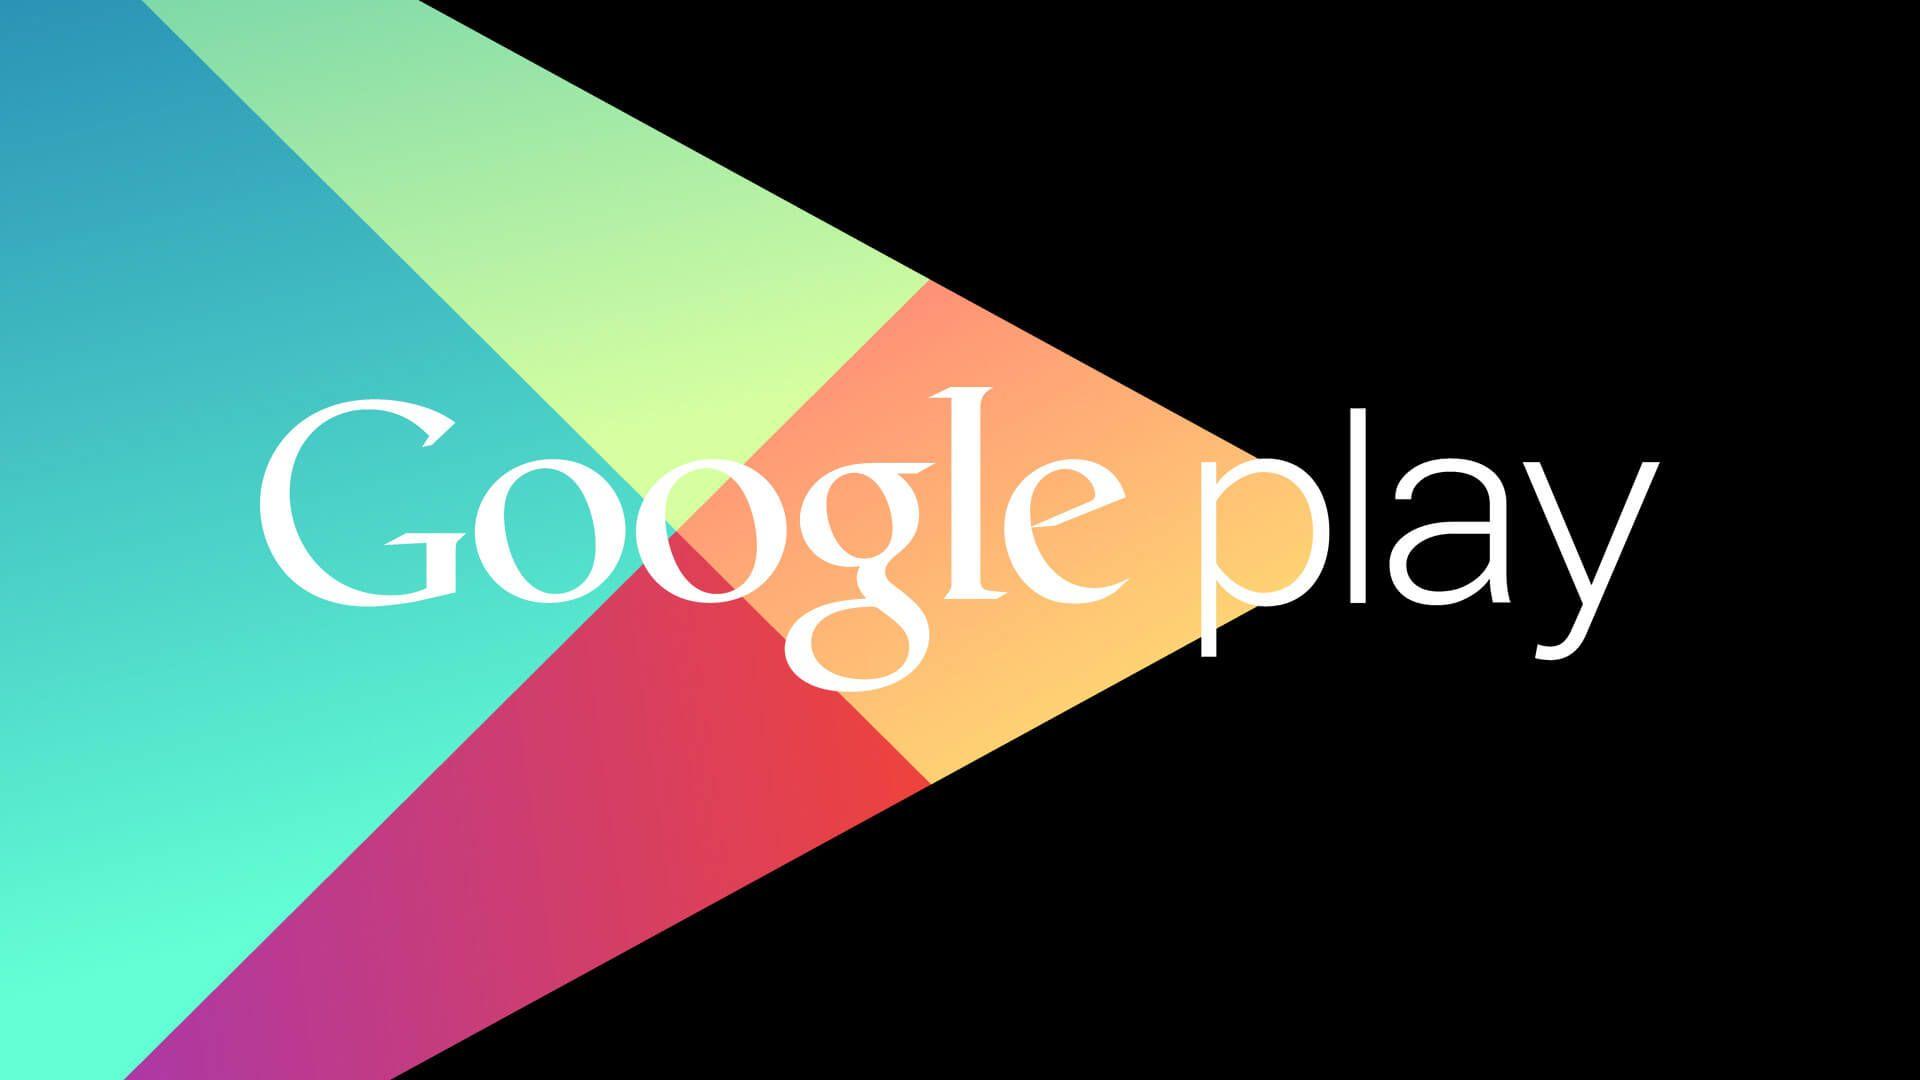 Google Play App On Android Logo - Search Ads In Google Play Store Rolling Out For All Android App